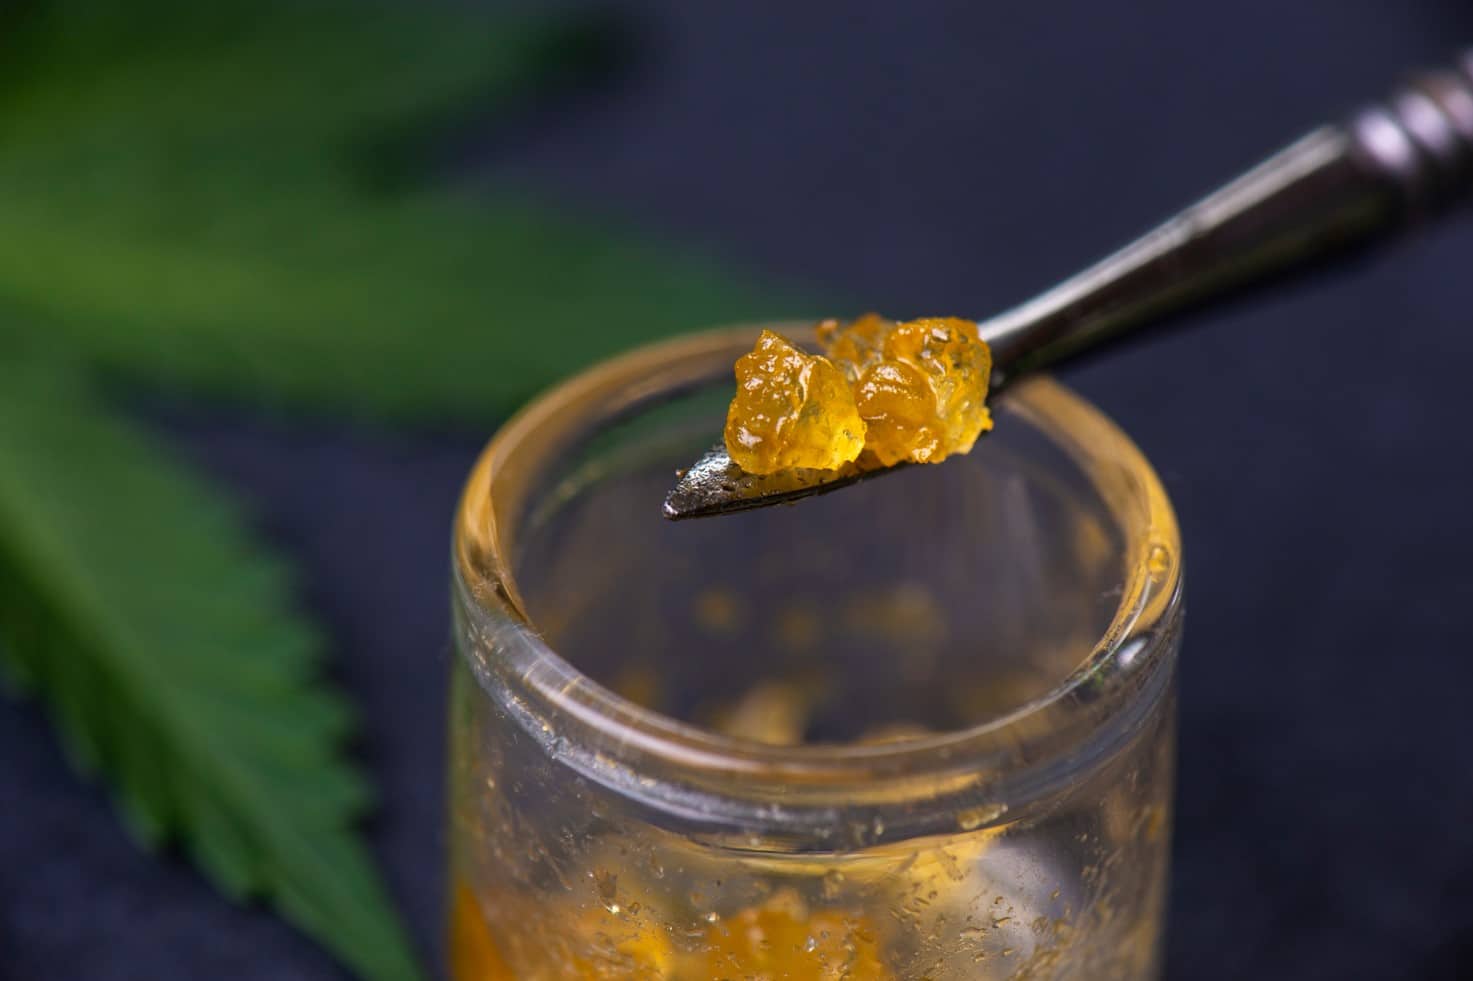 Cannabis concentrate on a dabbing tool in front of a marijuana leaf | Mountain Annie's - Durango Recreational Marijuana Dispensary